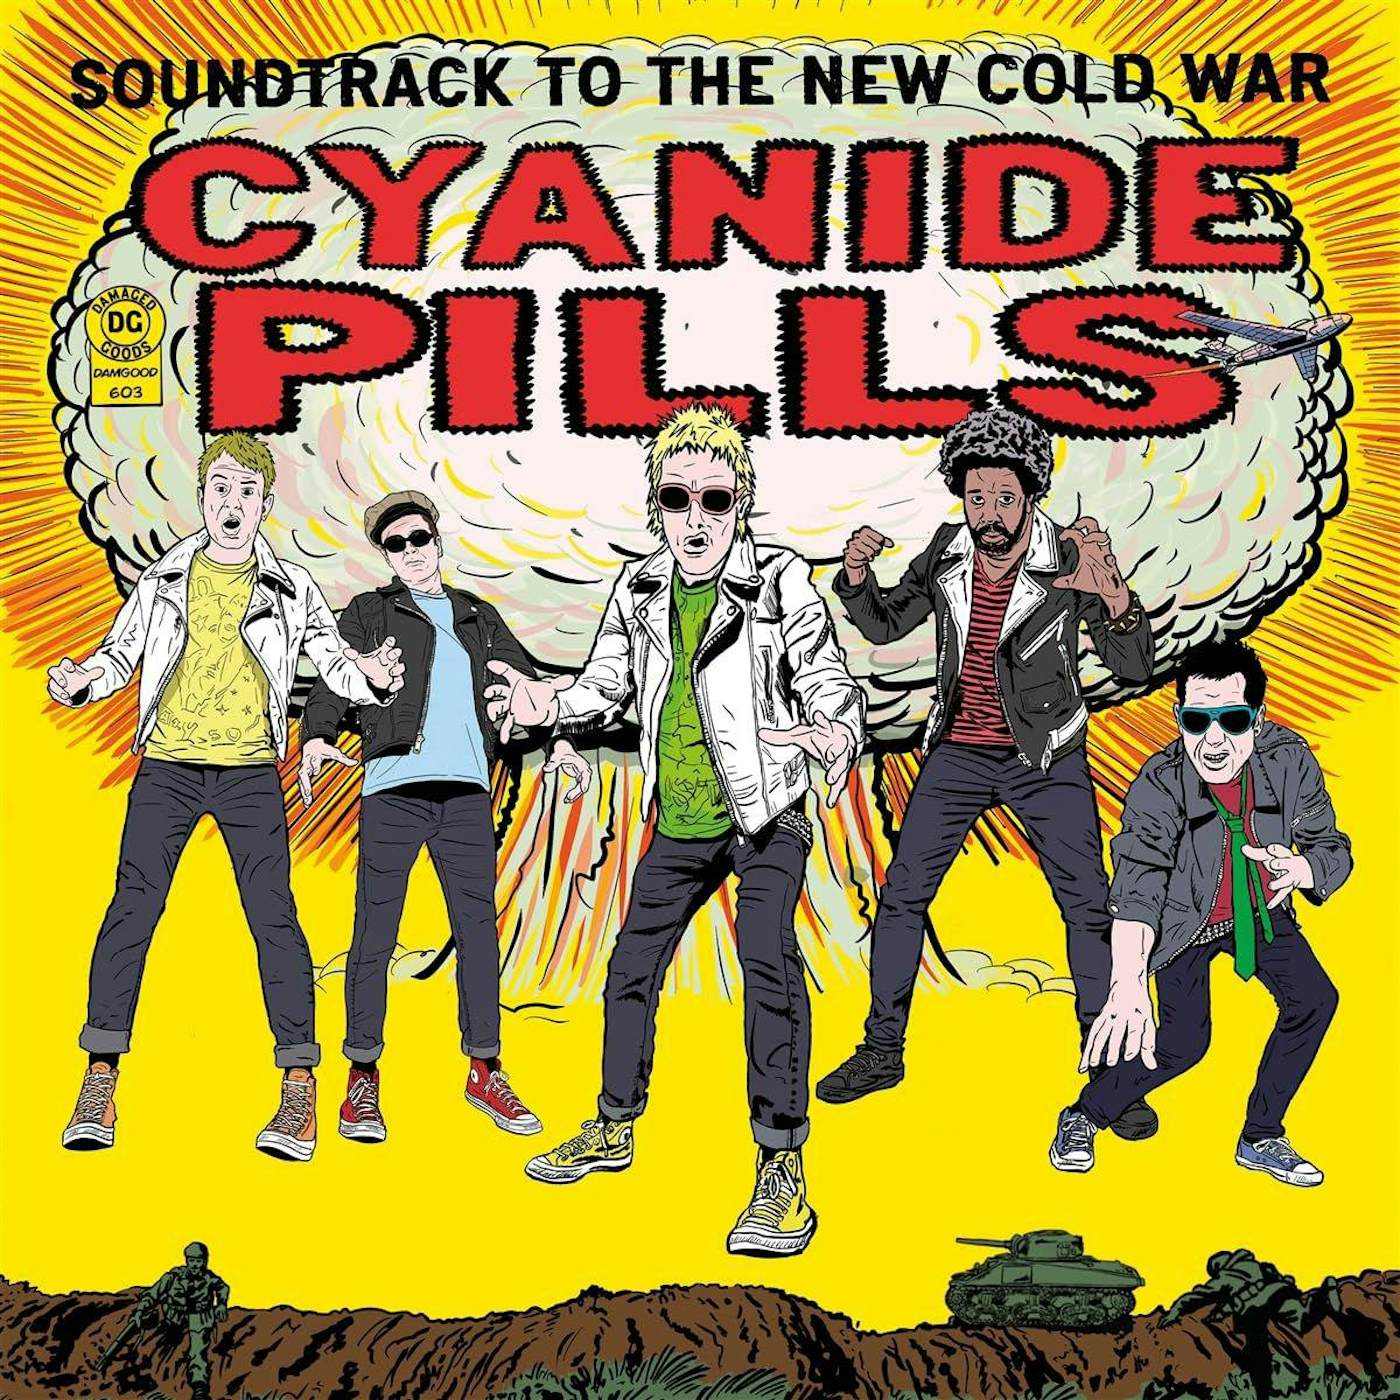 Cyanide Pills Soundtrack To The New Cold War Vinyl Record